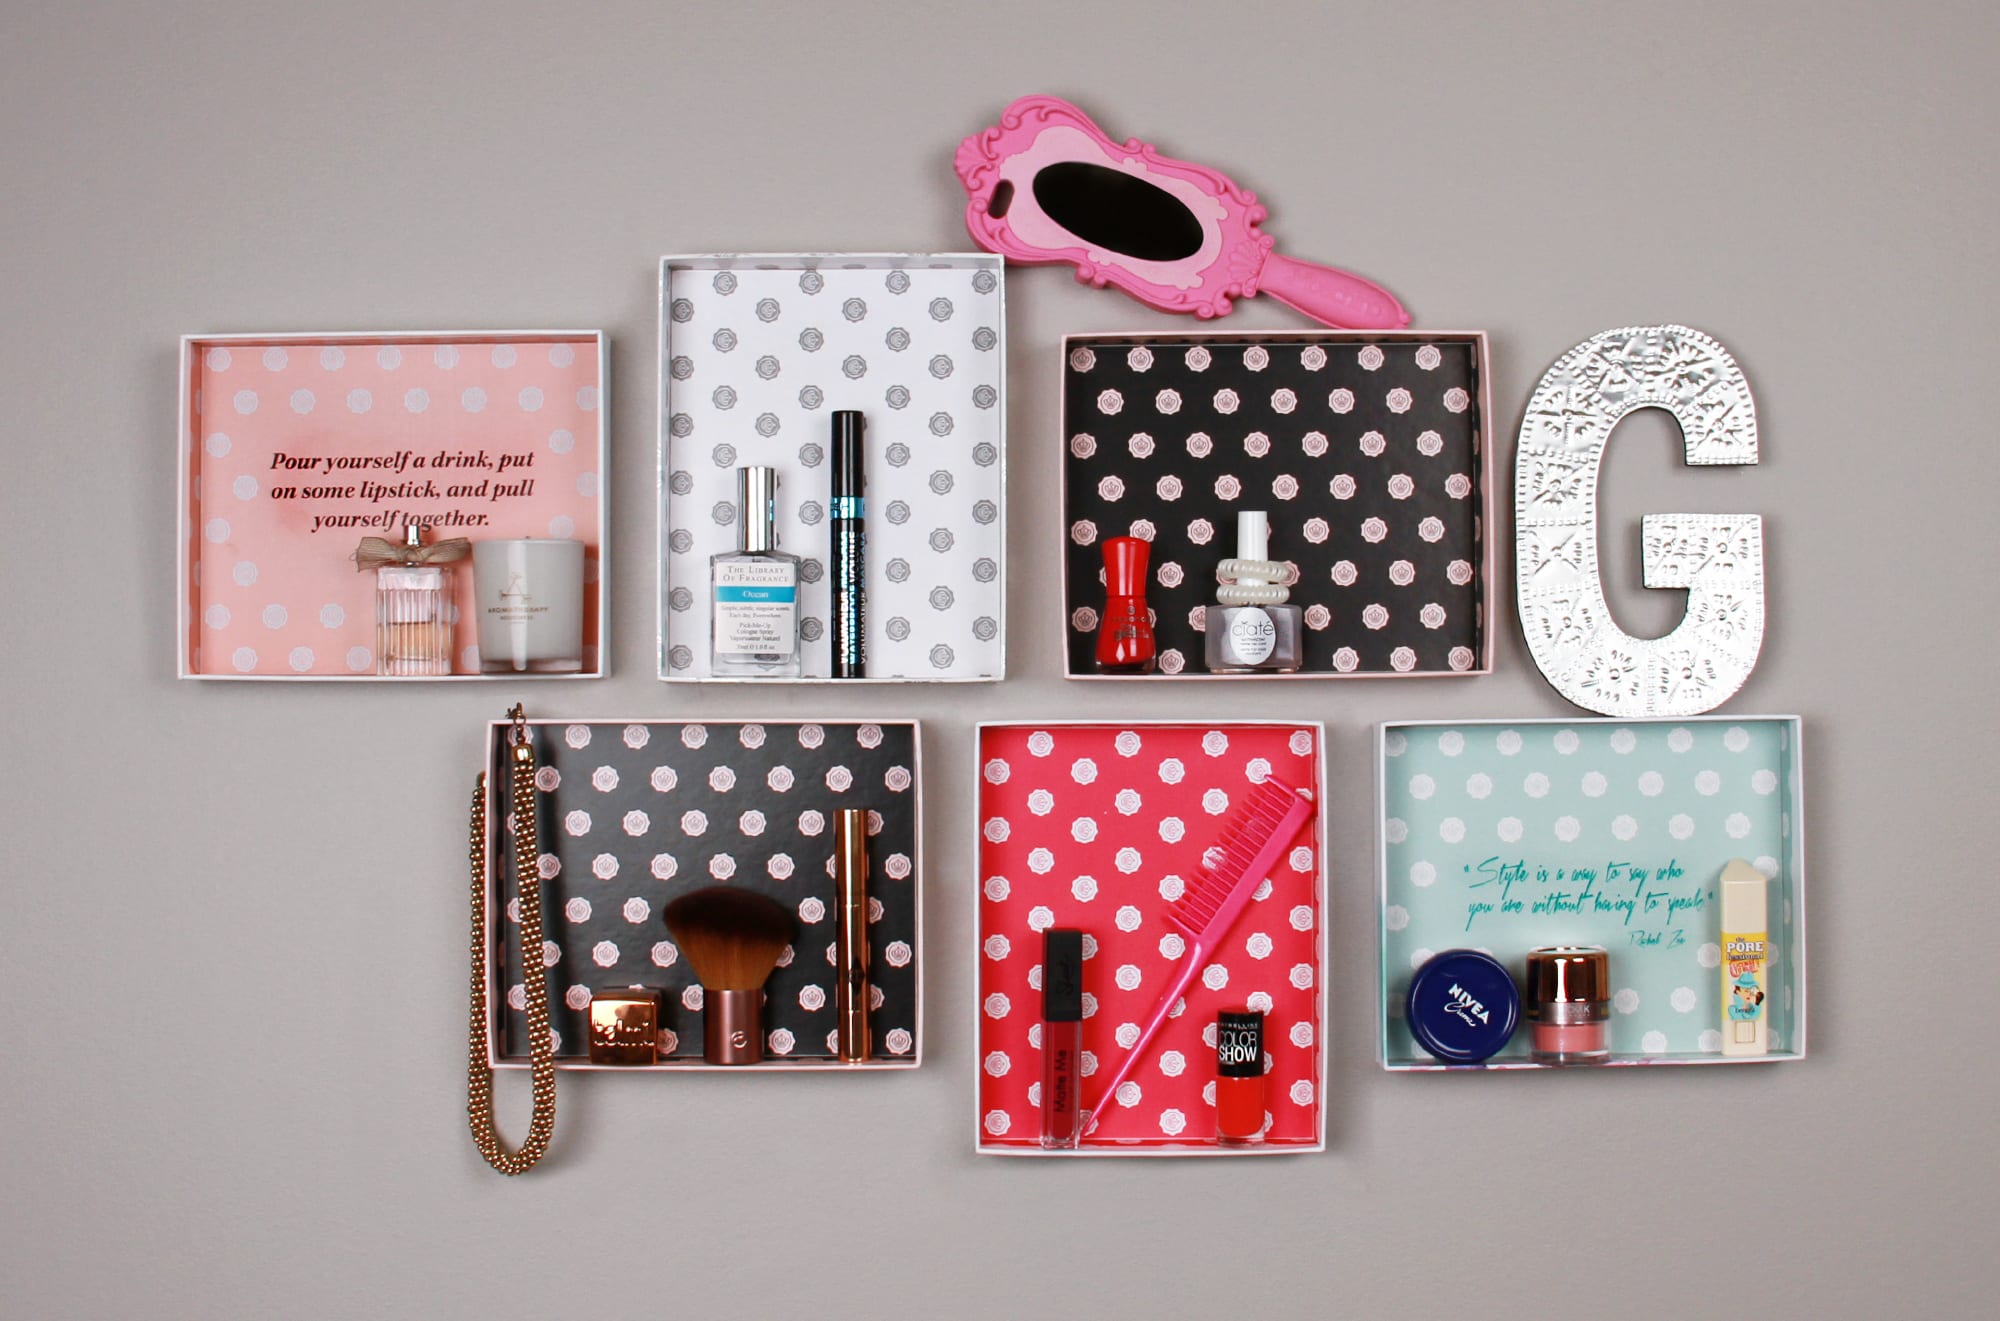 upscale_your_glossybox_shelves